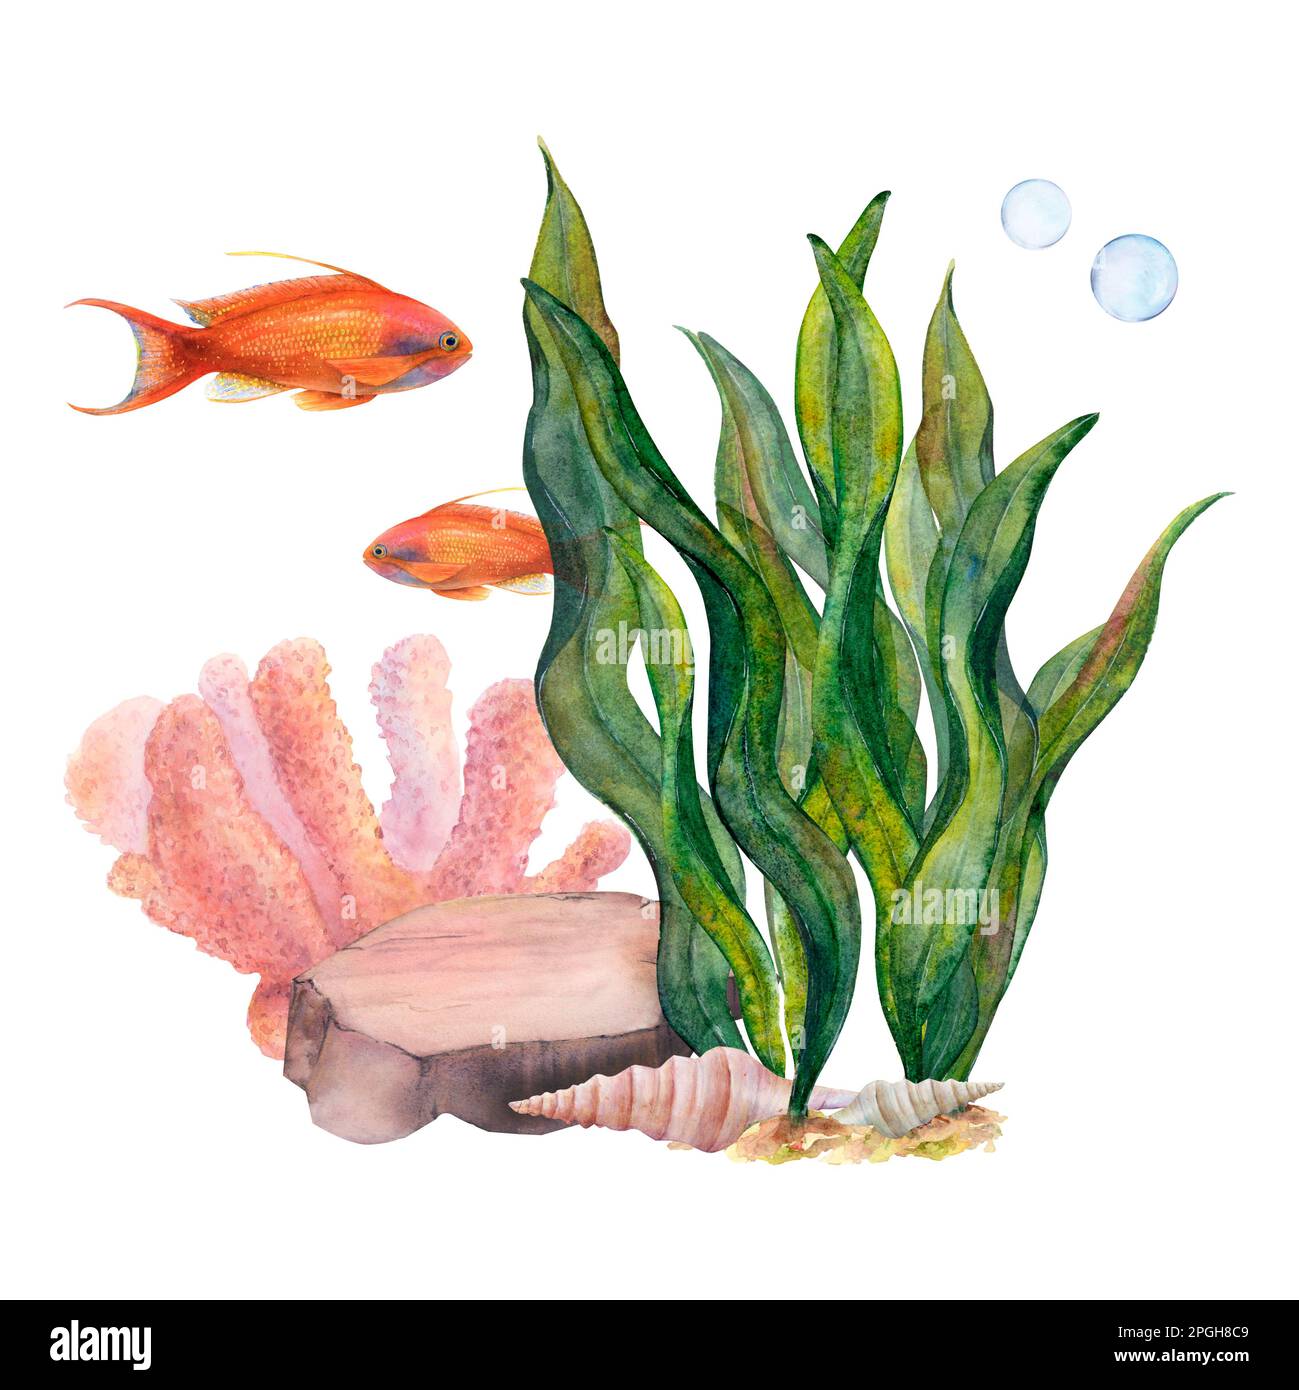 Watercolor drawn set of coral, ribbon algae, bottom stone, shells and a golden antias fish on white background. Underwater picture for illustration Stock Photo